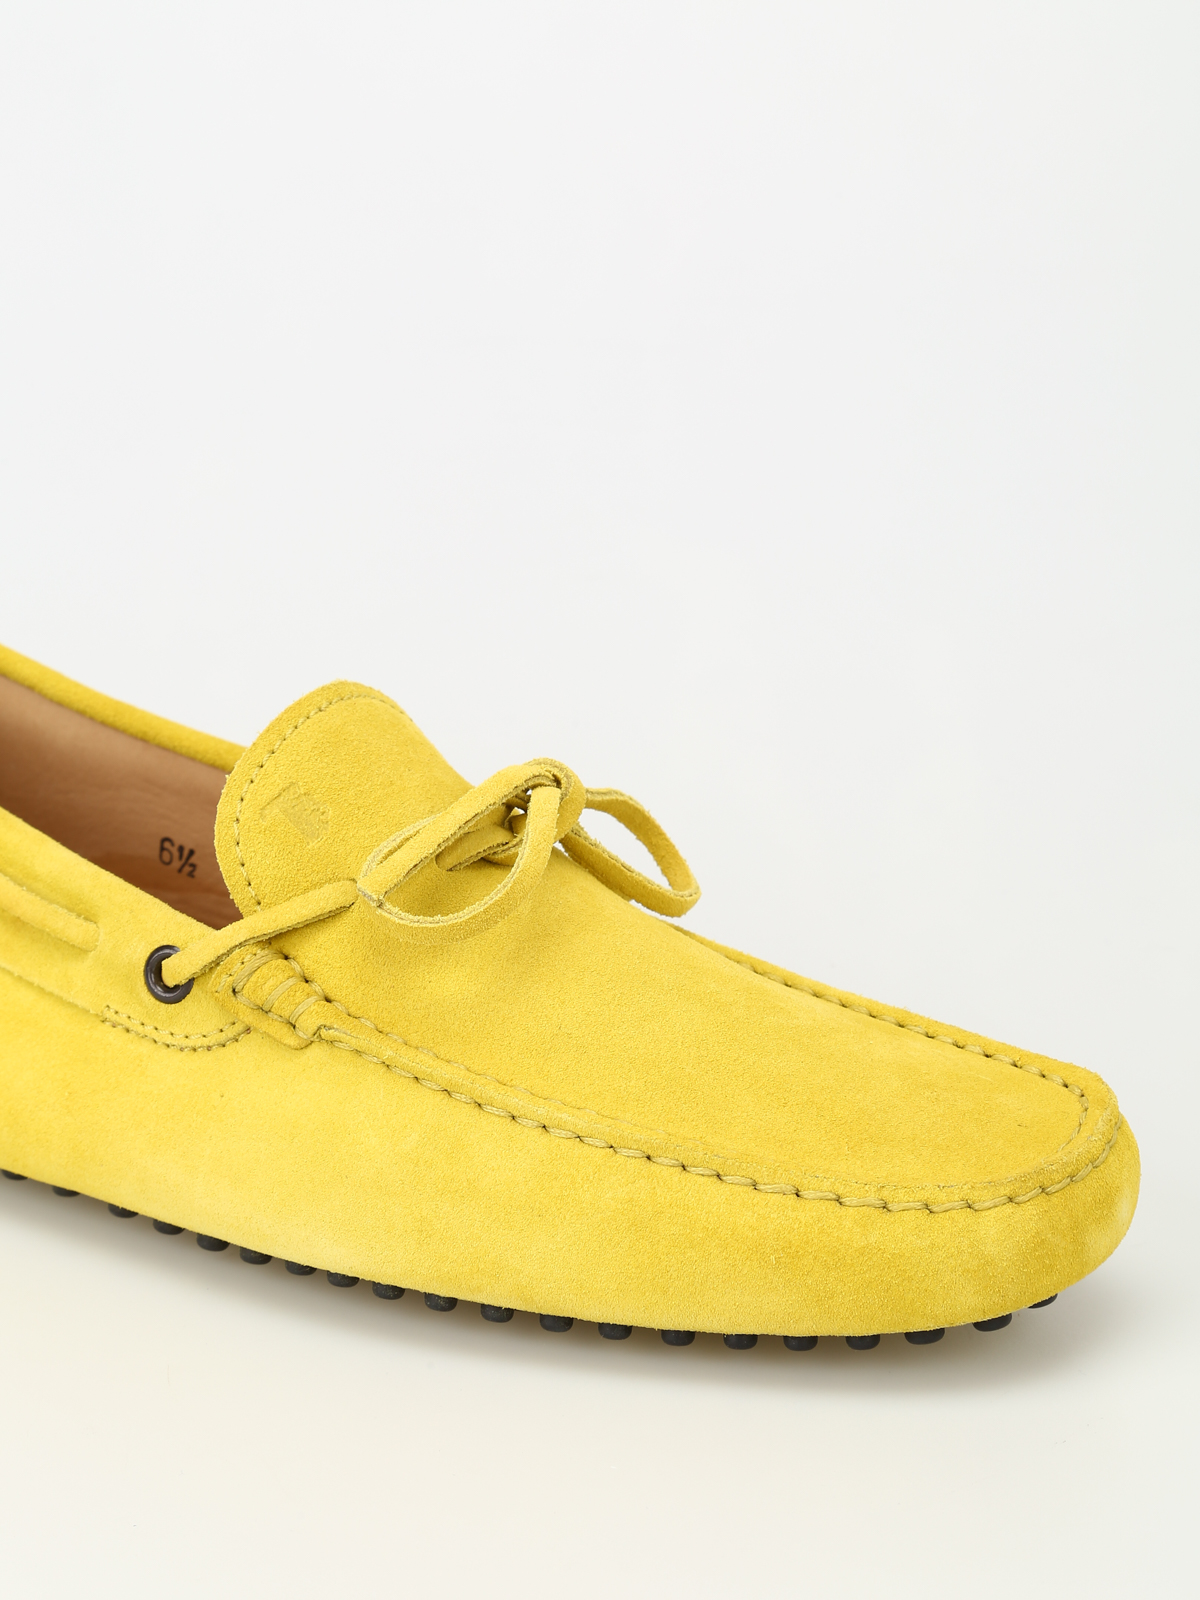 Laccetto yellow driving shoes - Loafers 